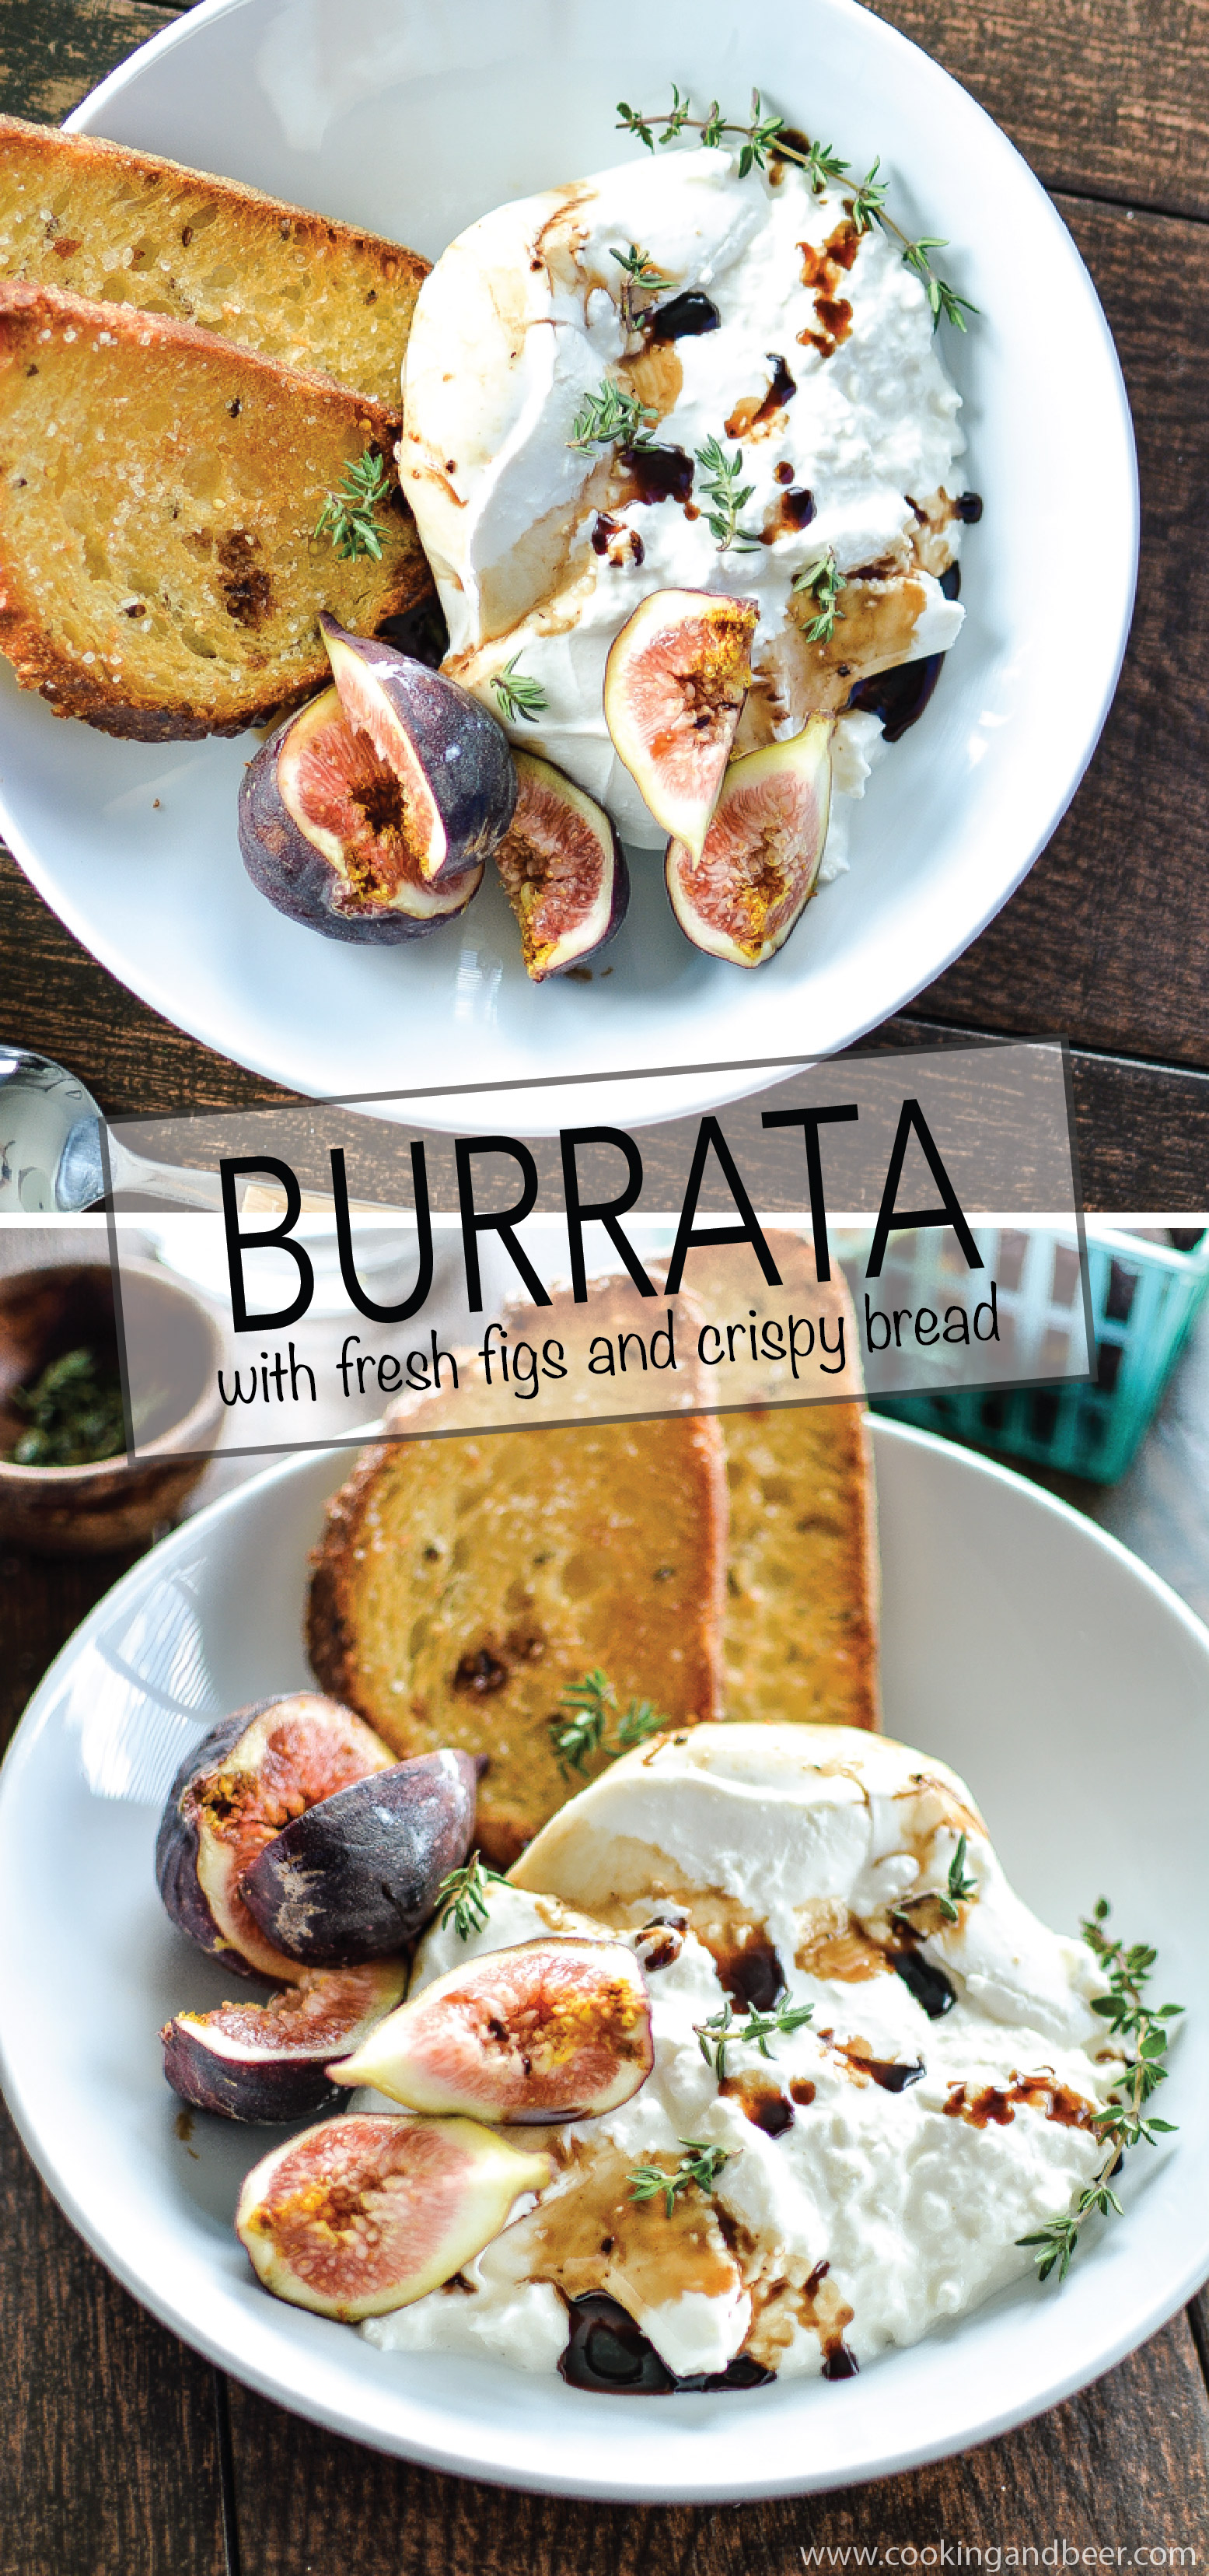 Burrata with Fresh Figs and Crispy Bread: a midday snack or appetizer recipe to get excited about! | www.cookingandbeer.com